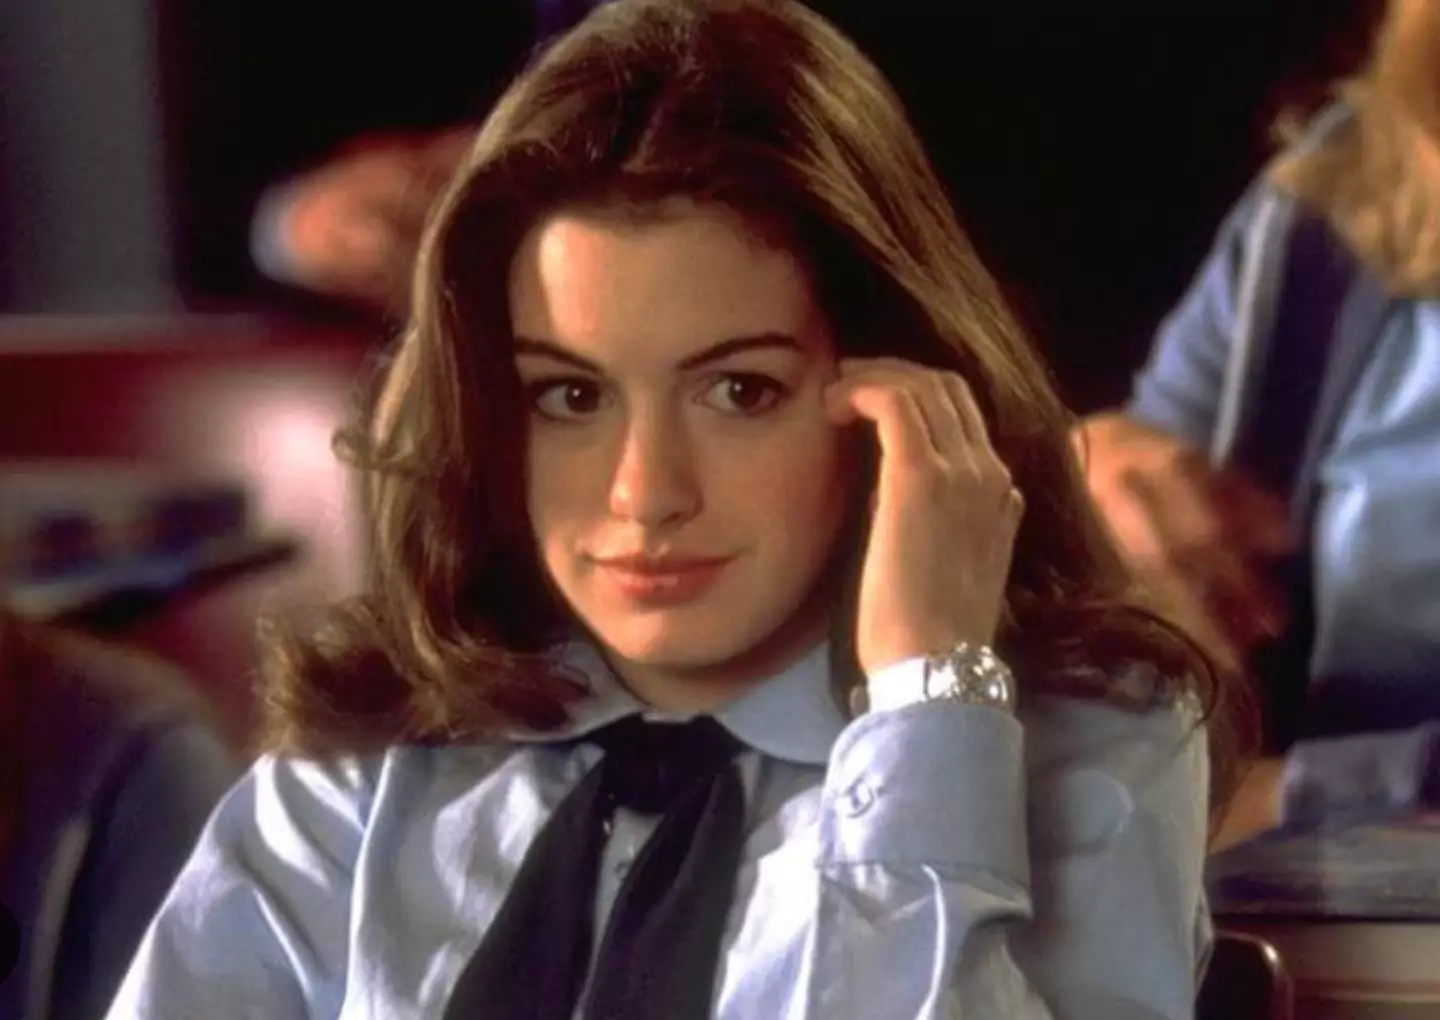 Anne Hathaway was just 17 when she starred in The Princess Diaries.